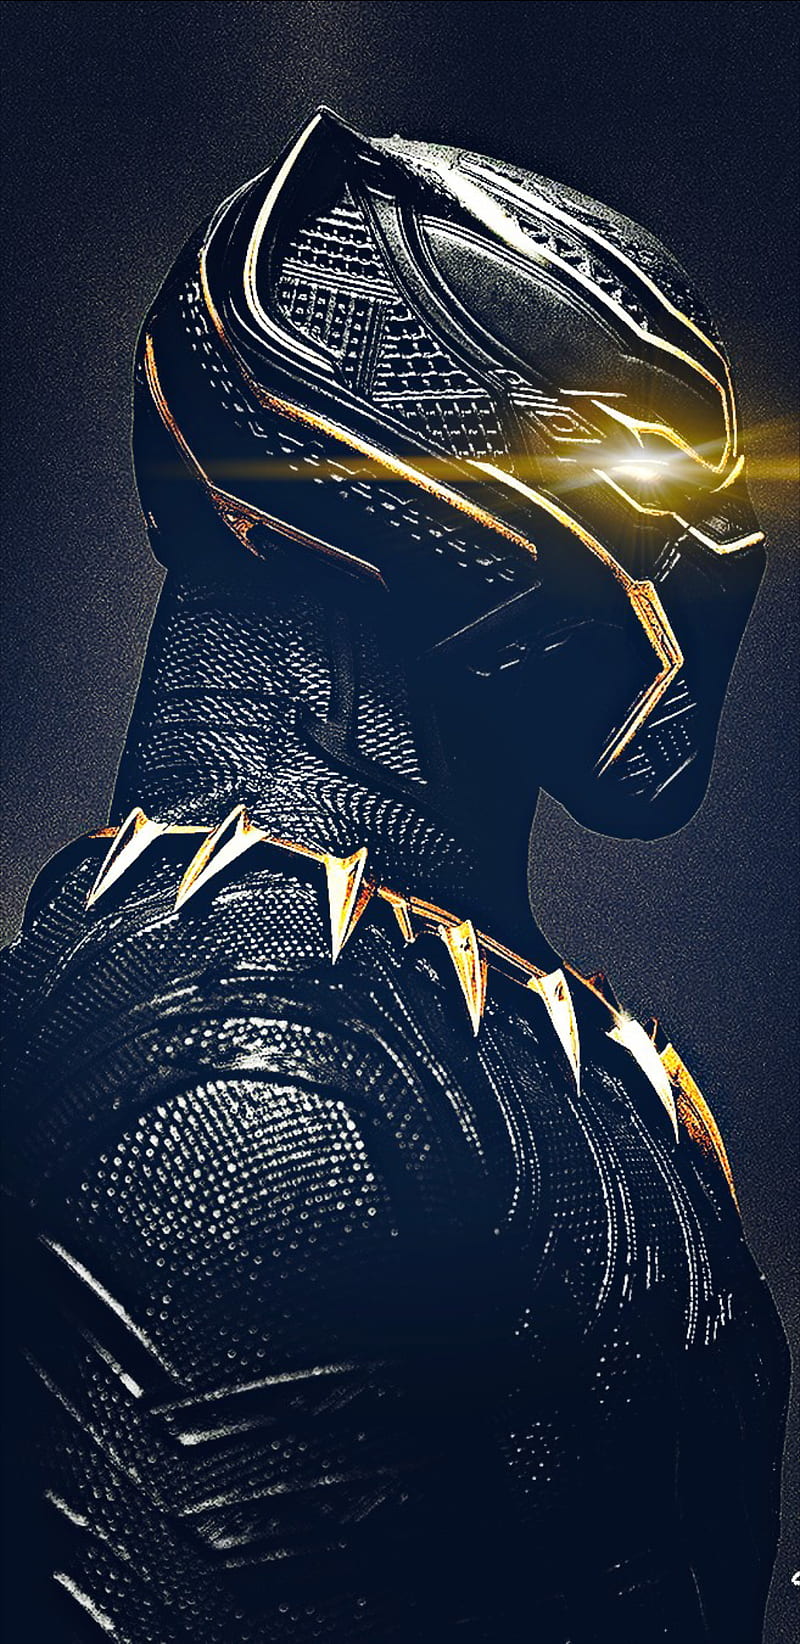 Marvel Contest of Champions  This Killmonger wallpaper will usurp control  of your mobile device Add him to your roster httpbitlyMCoCArenas   Facebook